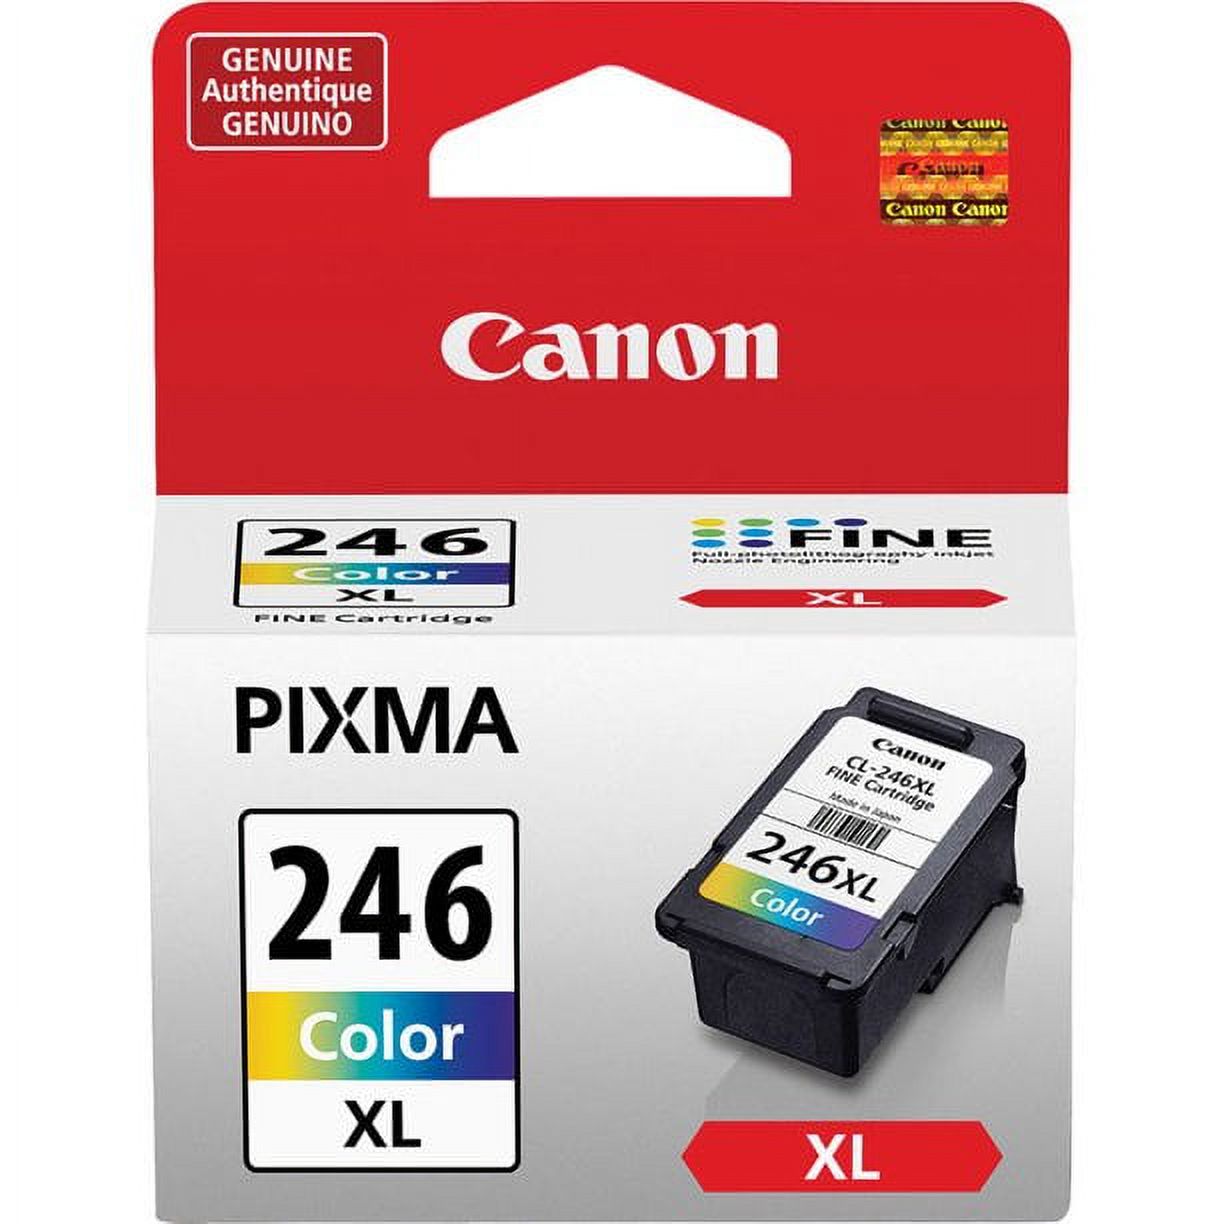 Canon PG-245 XL / CL-246 XL Value Pack - image 3 of 3